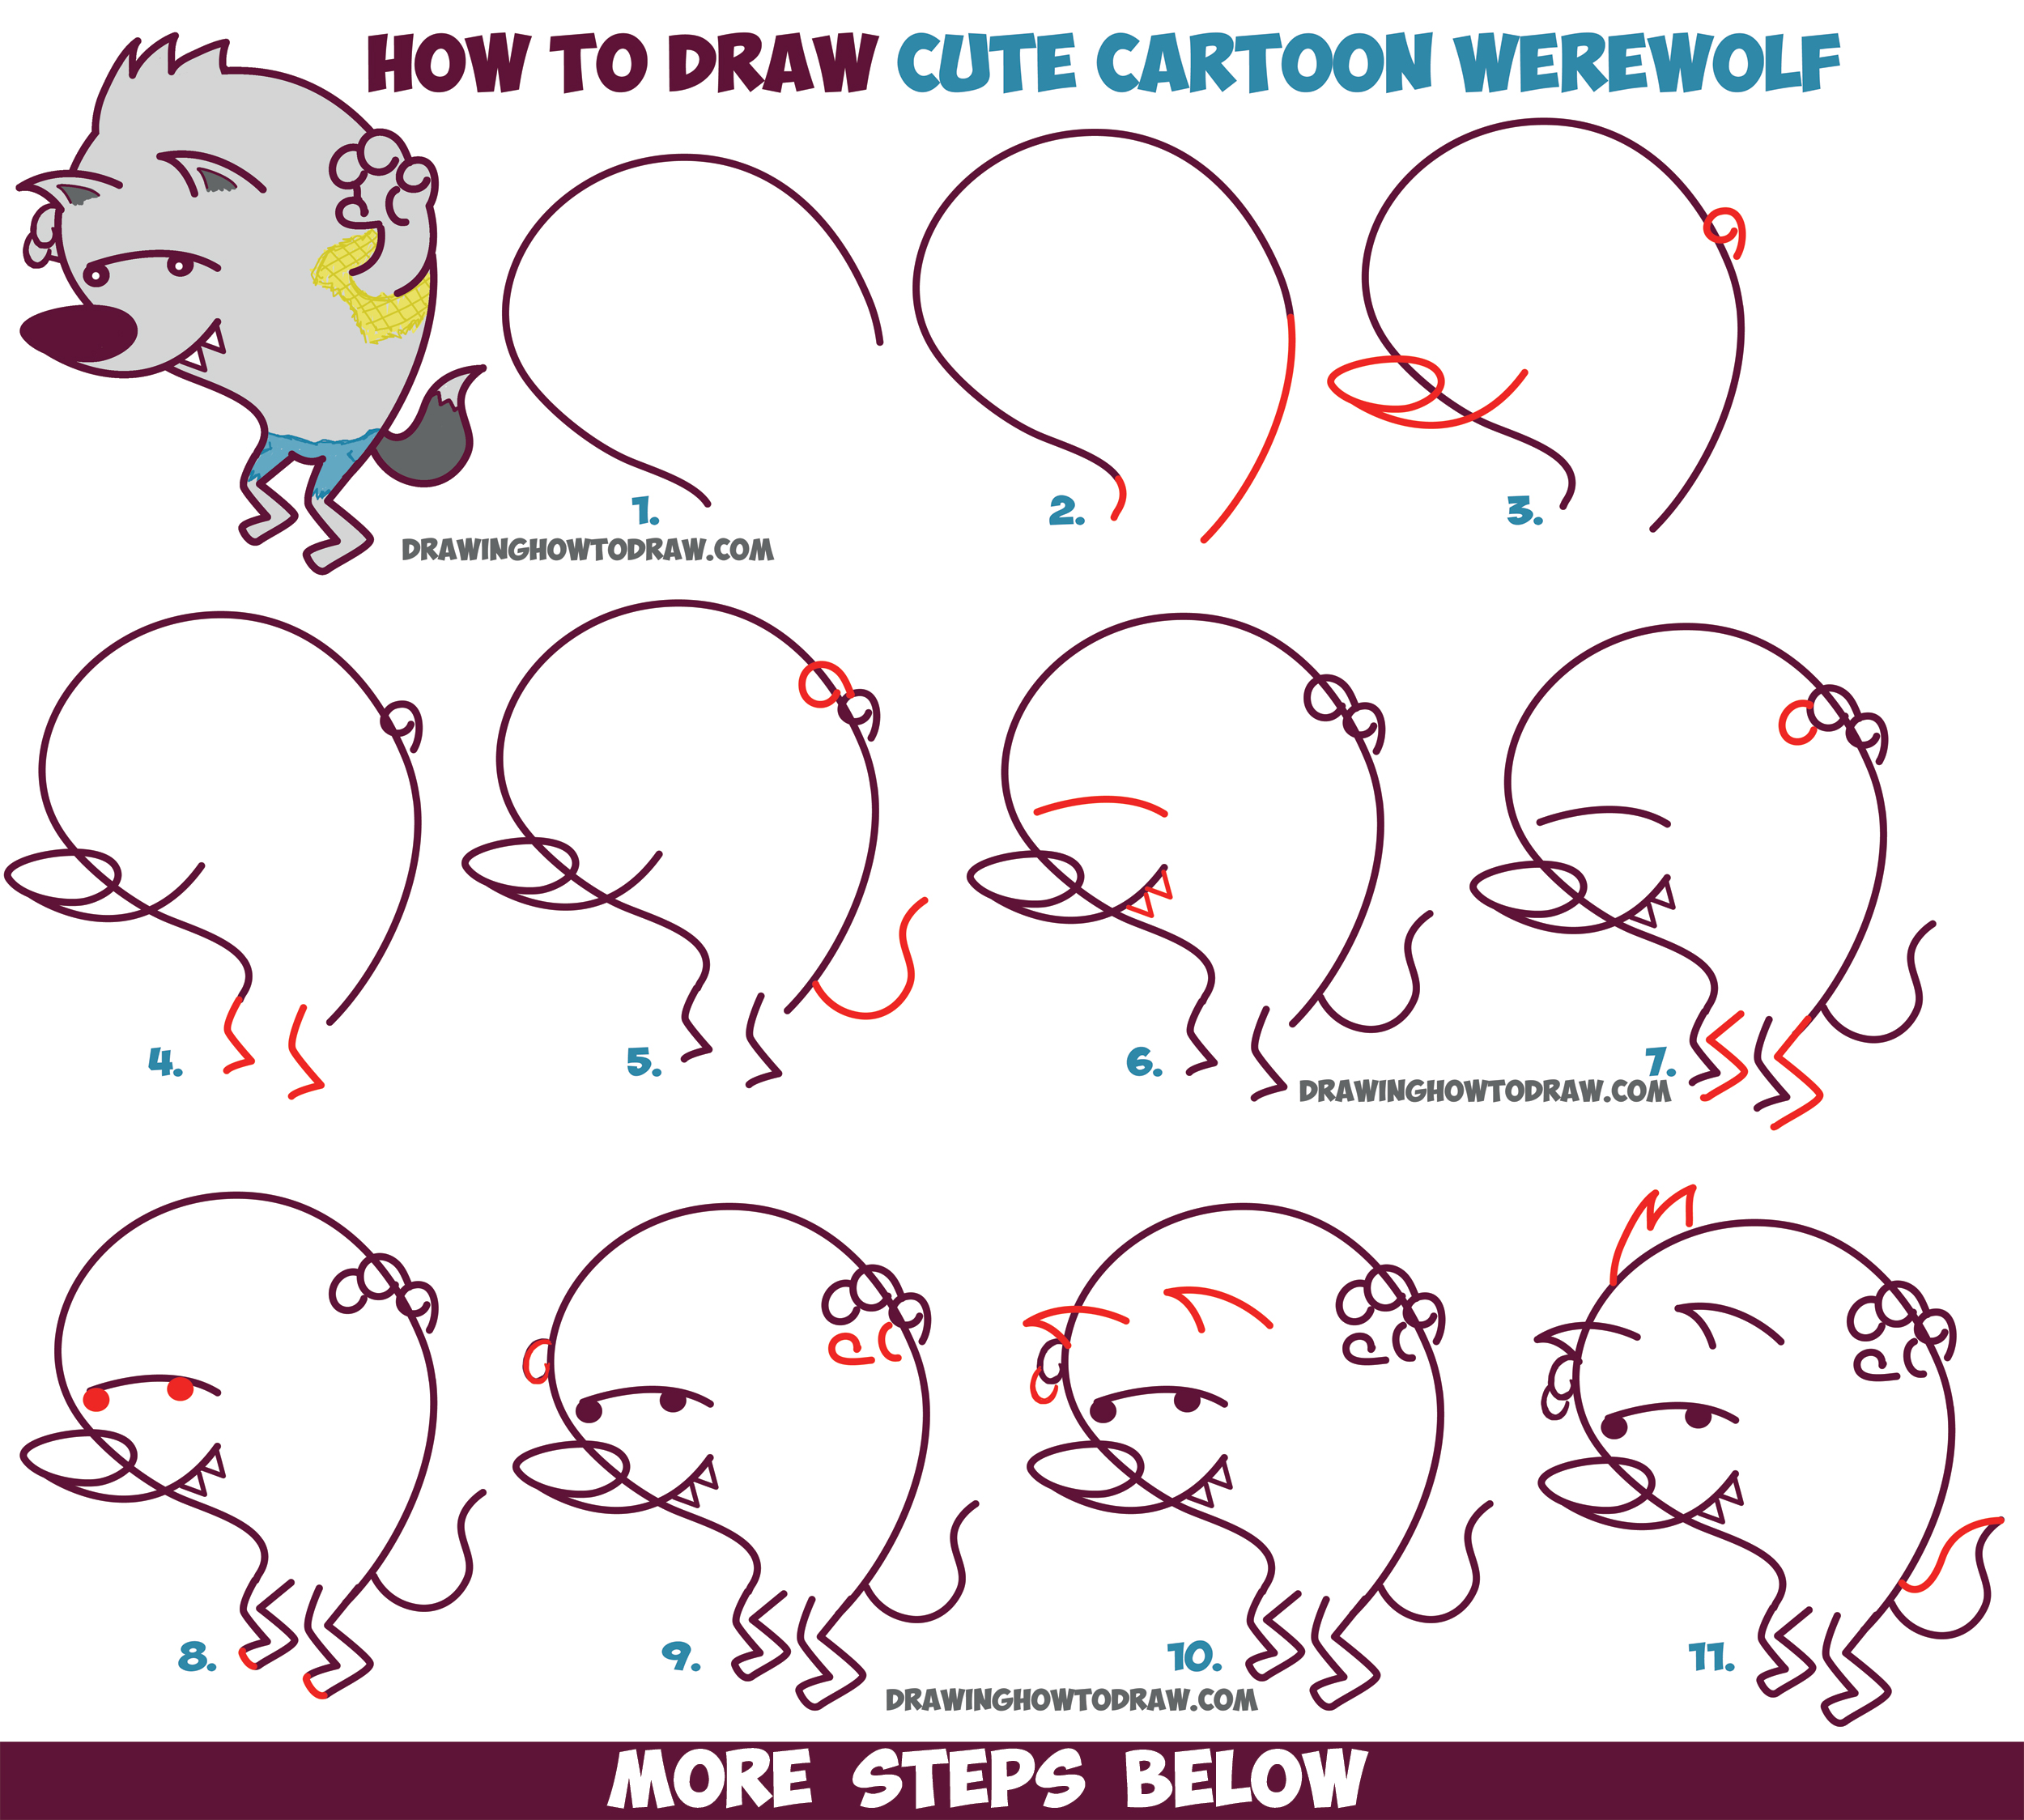 How to Draw a Cute Cartoon Werewolf for Halloween (Kawaii / Chibi) - Easy Step by Step Drawing Tutorial for Kids